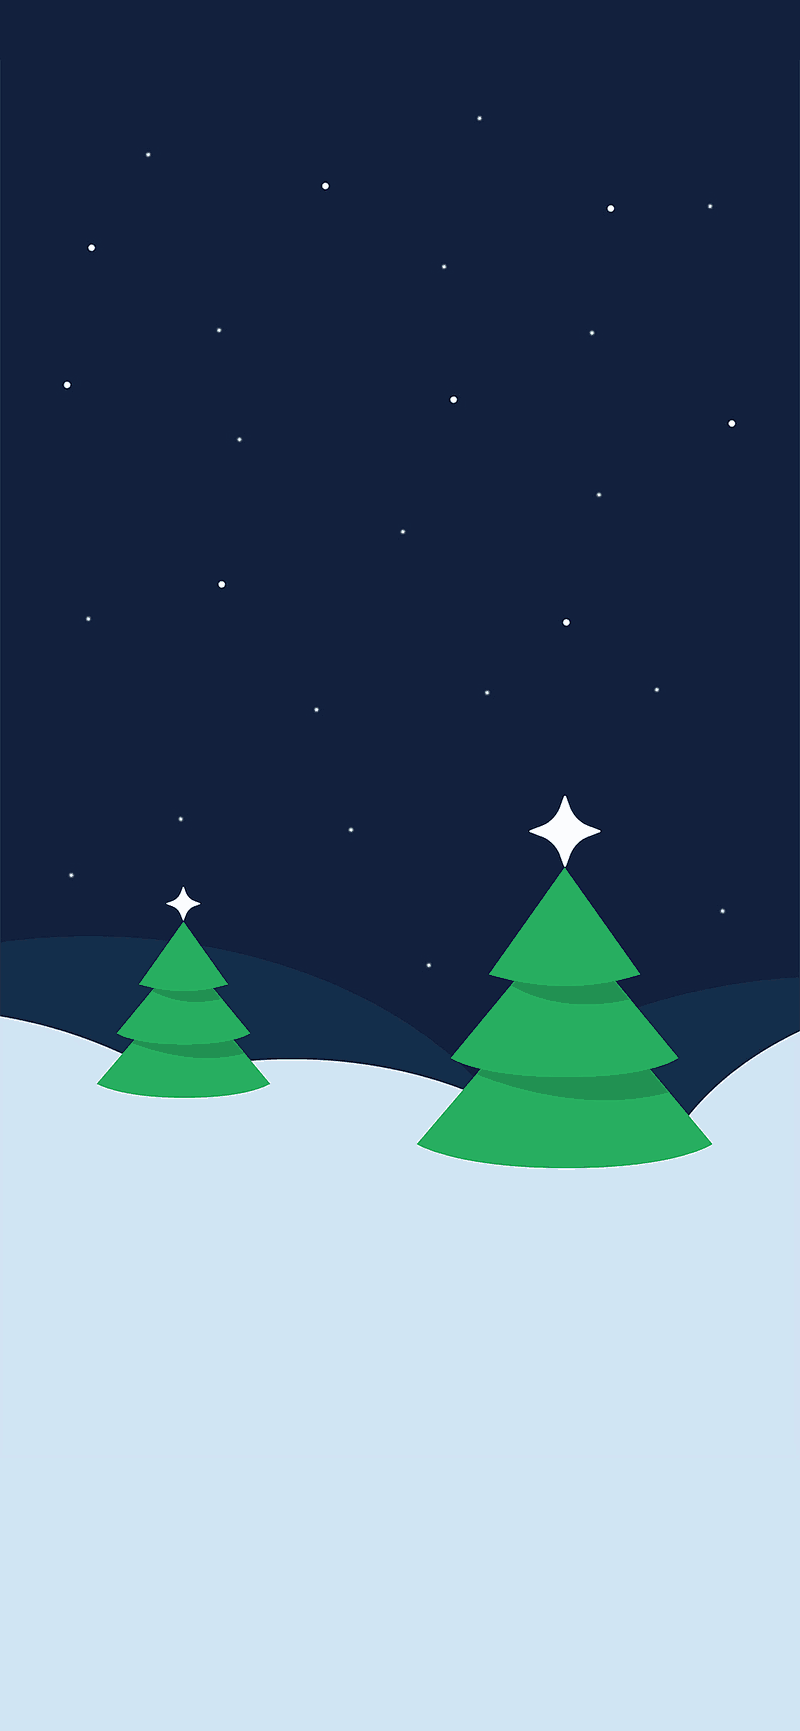 Christmas Wallpaper for iPhone XS MAX, XS, XR, X & Older Models